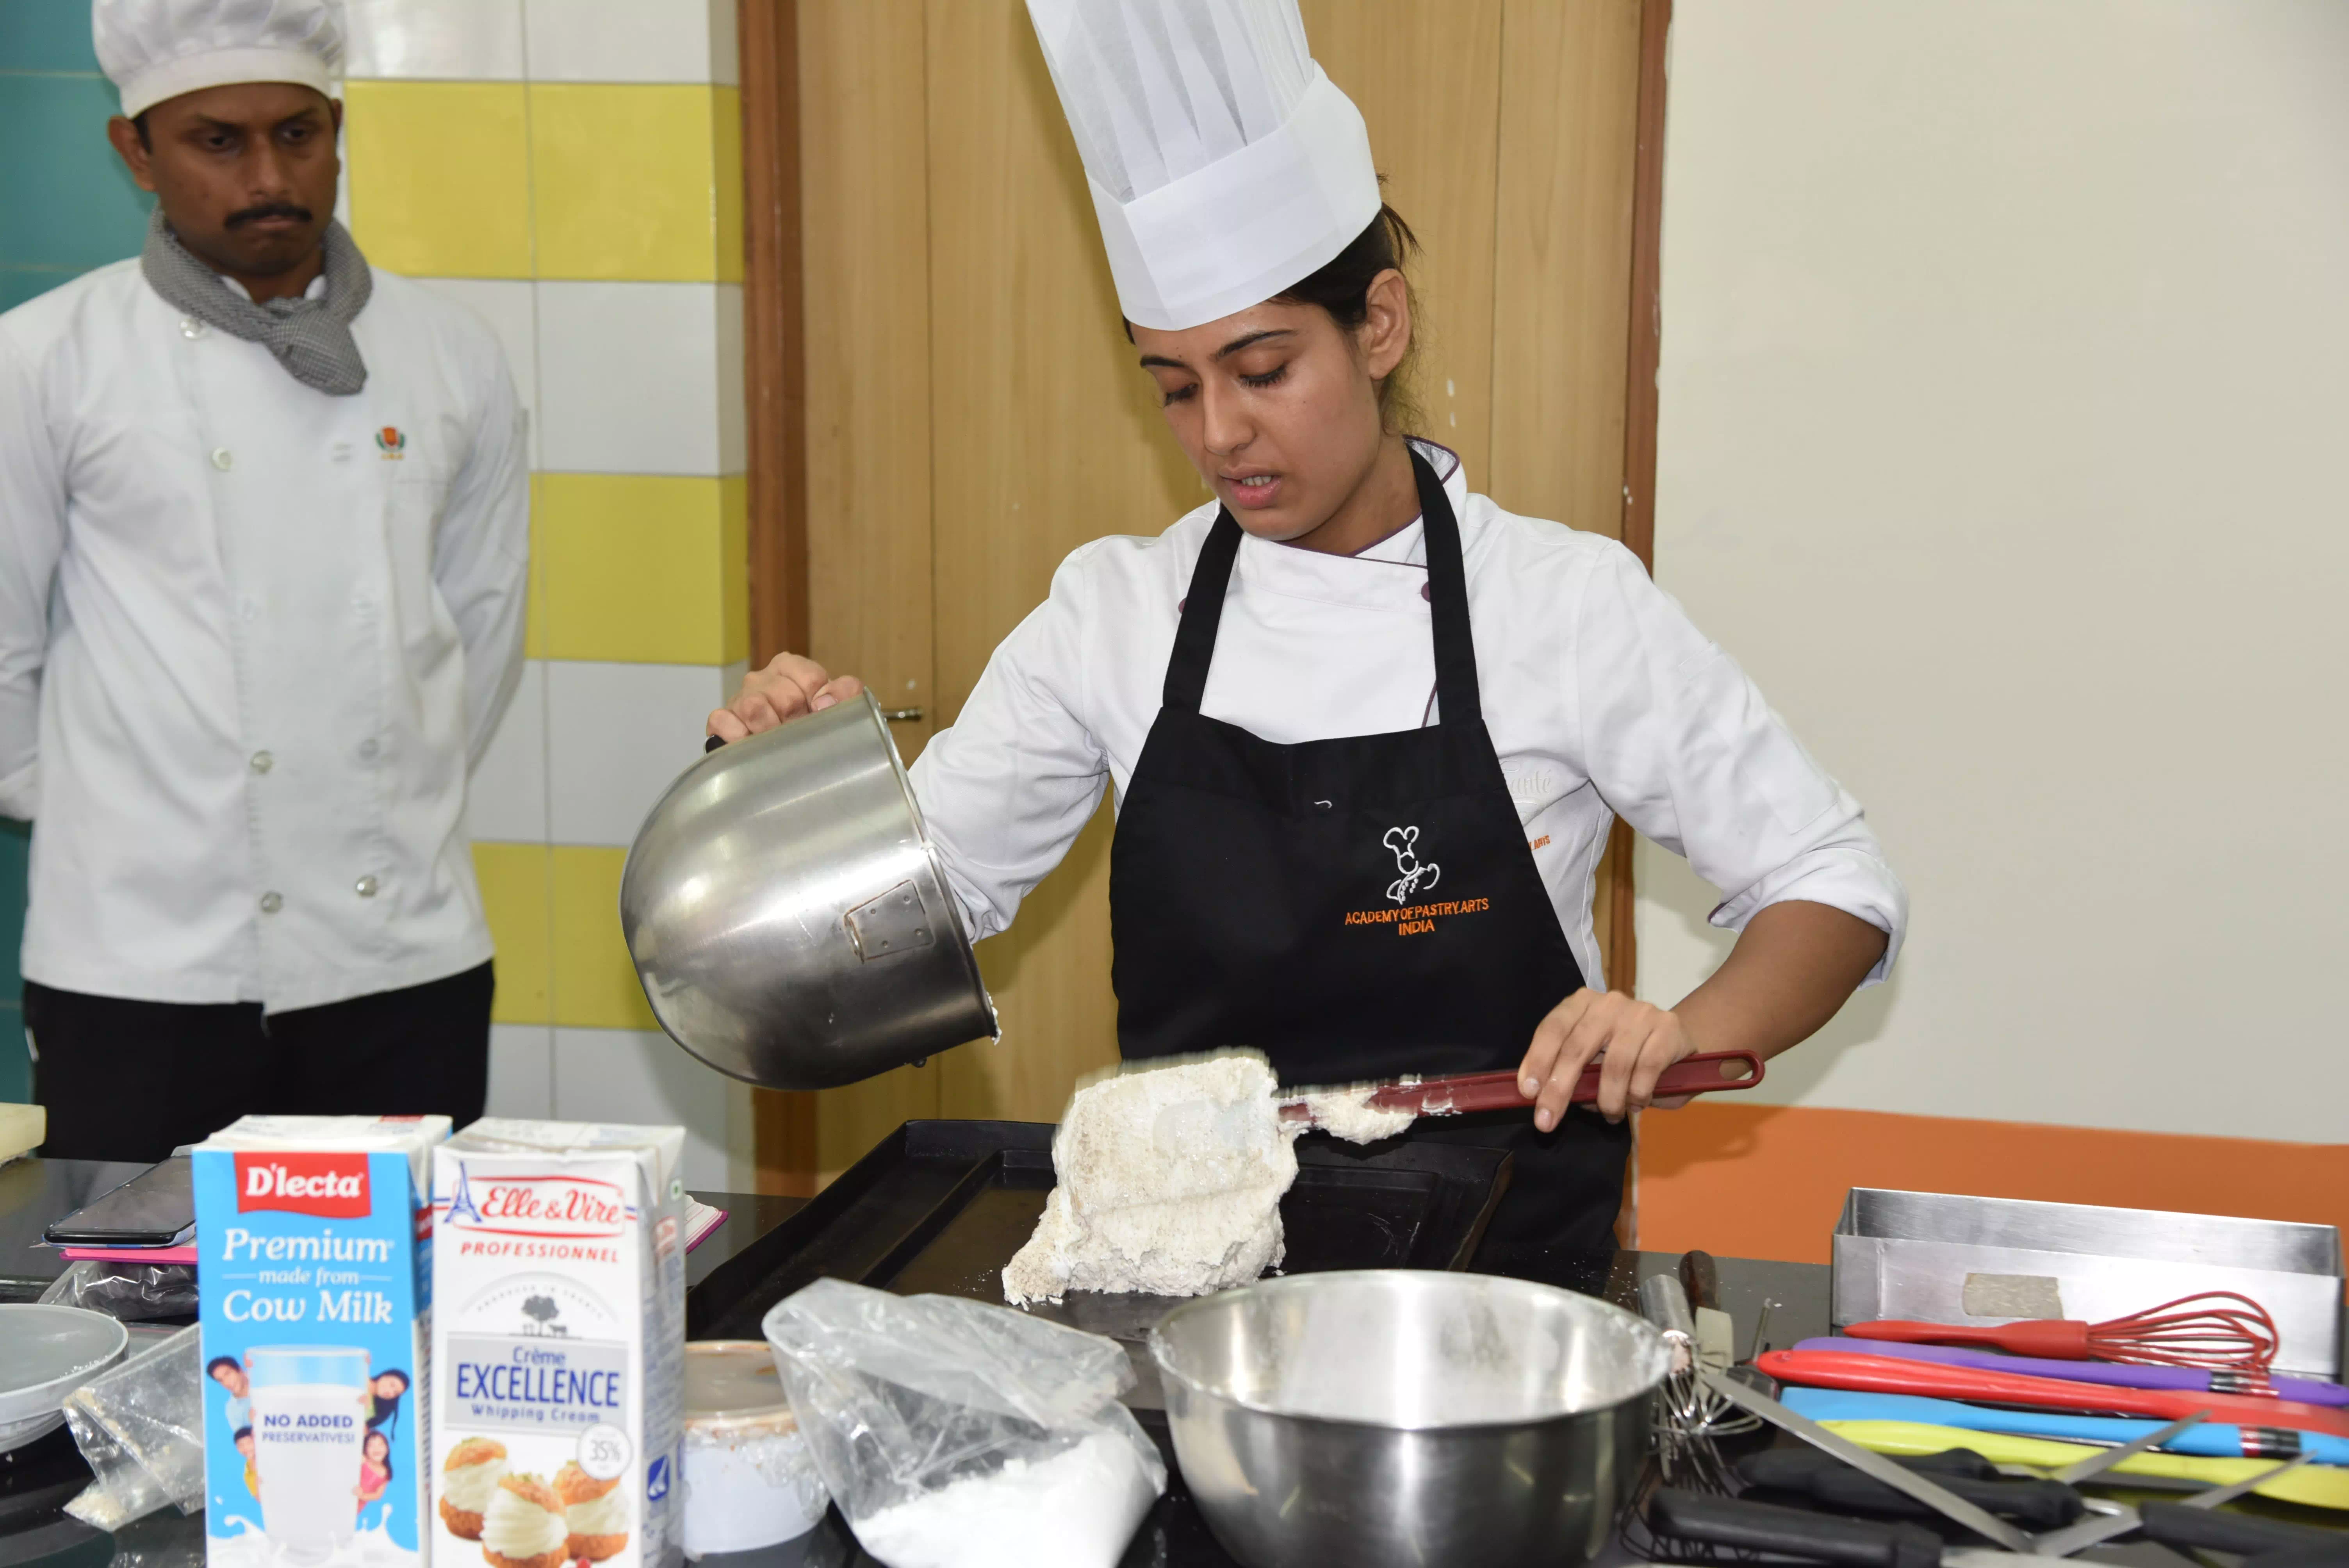 Workshop on Modern French pastry 